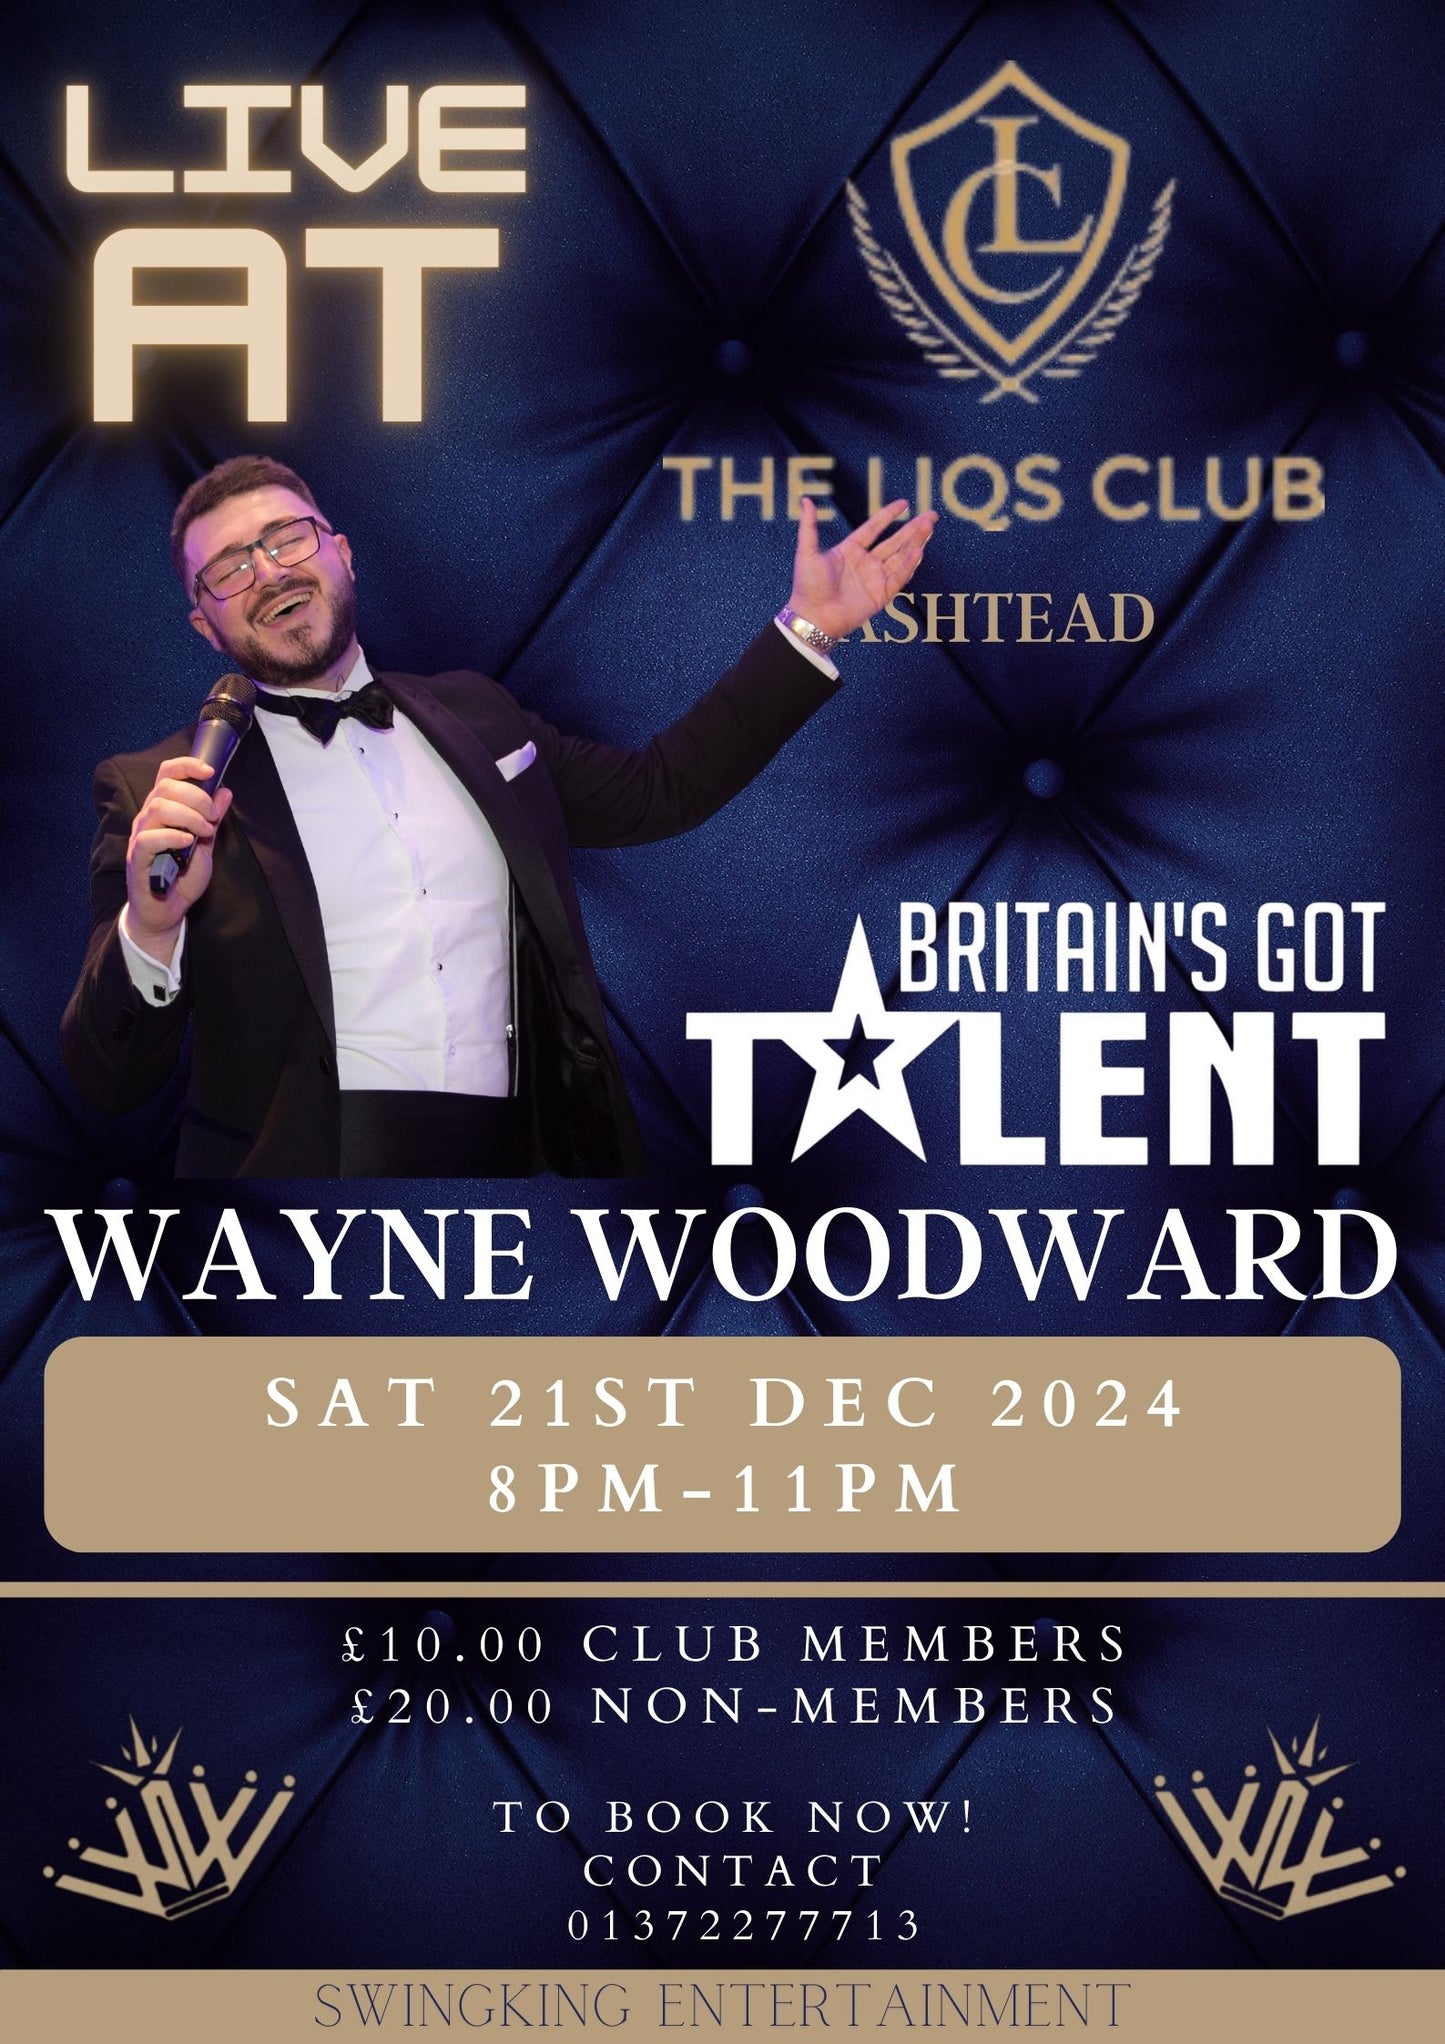 Live Music with Wayne Woodward - Saturday 21st December 2024